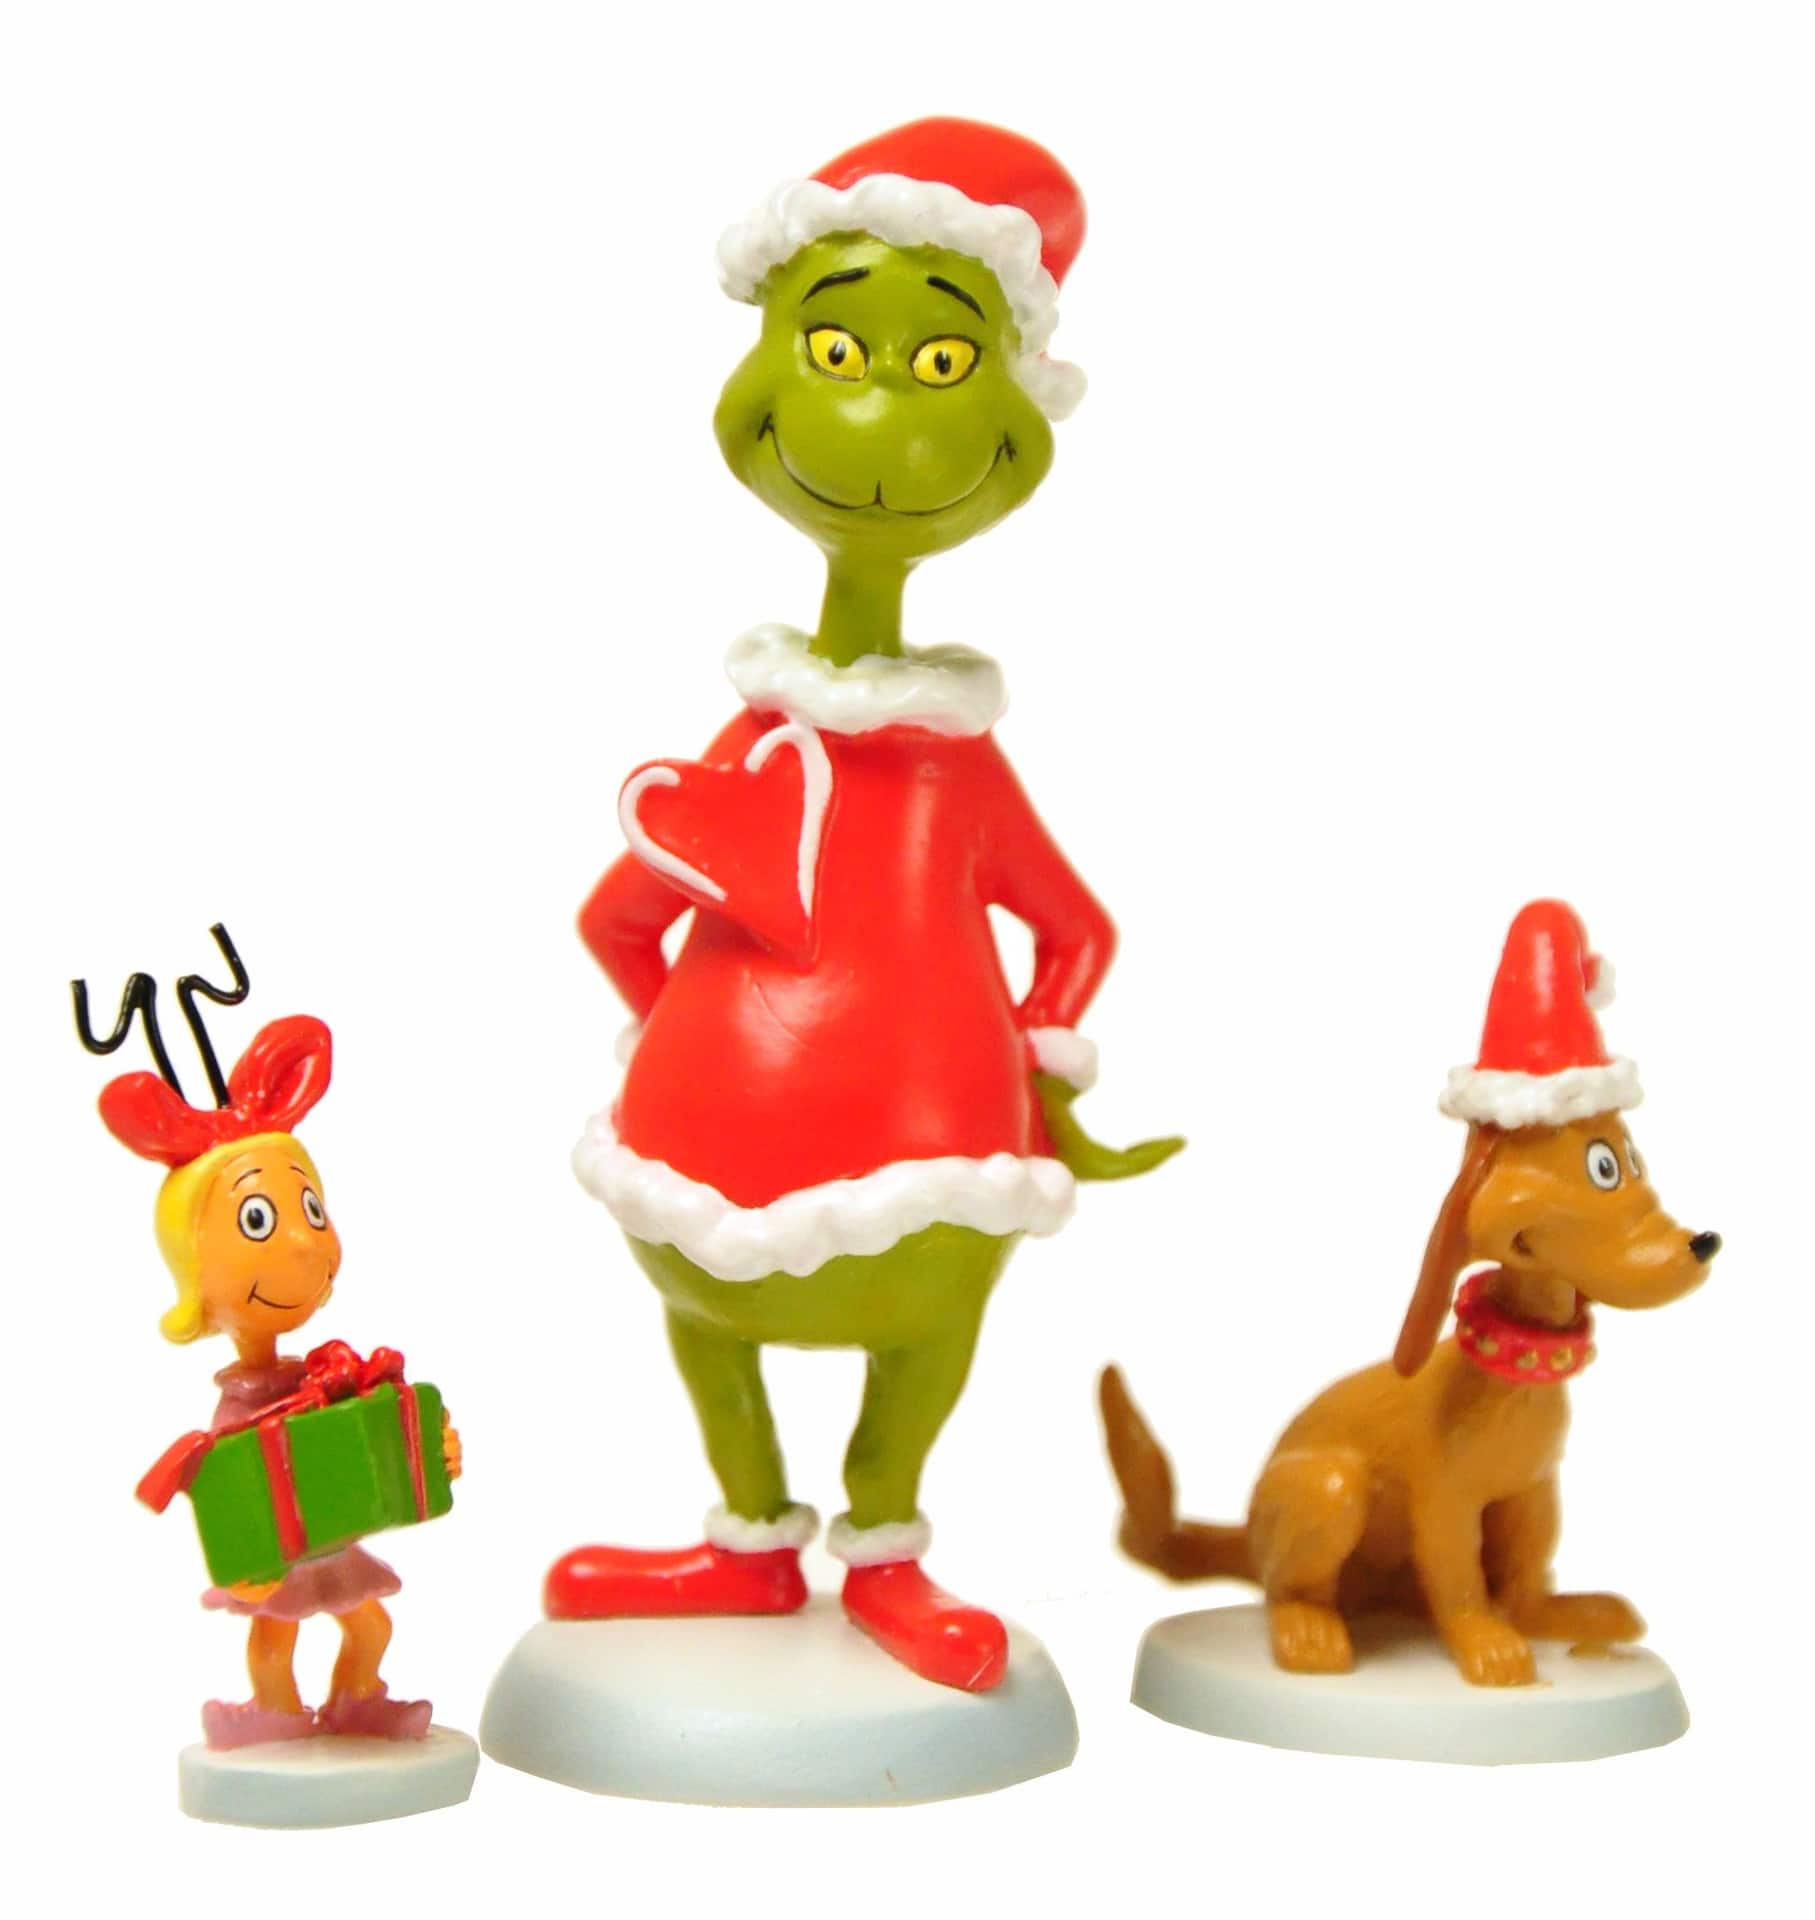 Department 56 The Grinch Figurine Set, Grinch Max and Cindy | Canadian Tire